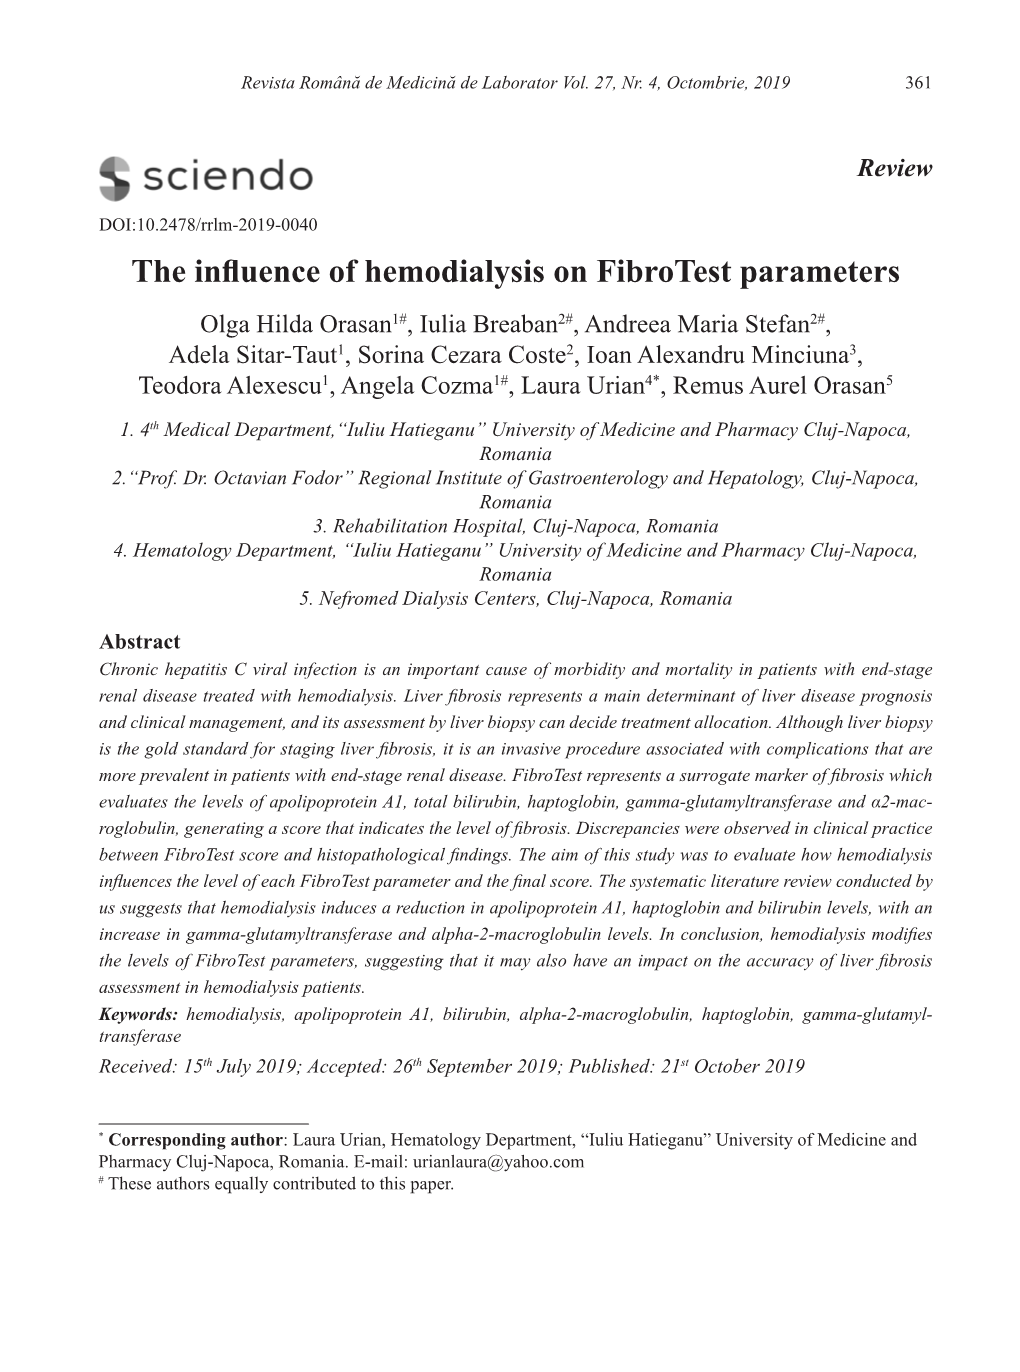 The Influence of Hemodialysis on Fibrotest Parameters